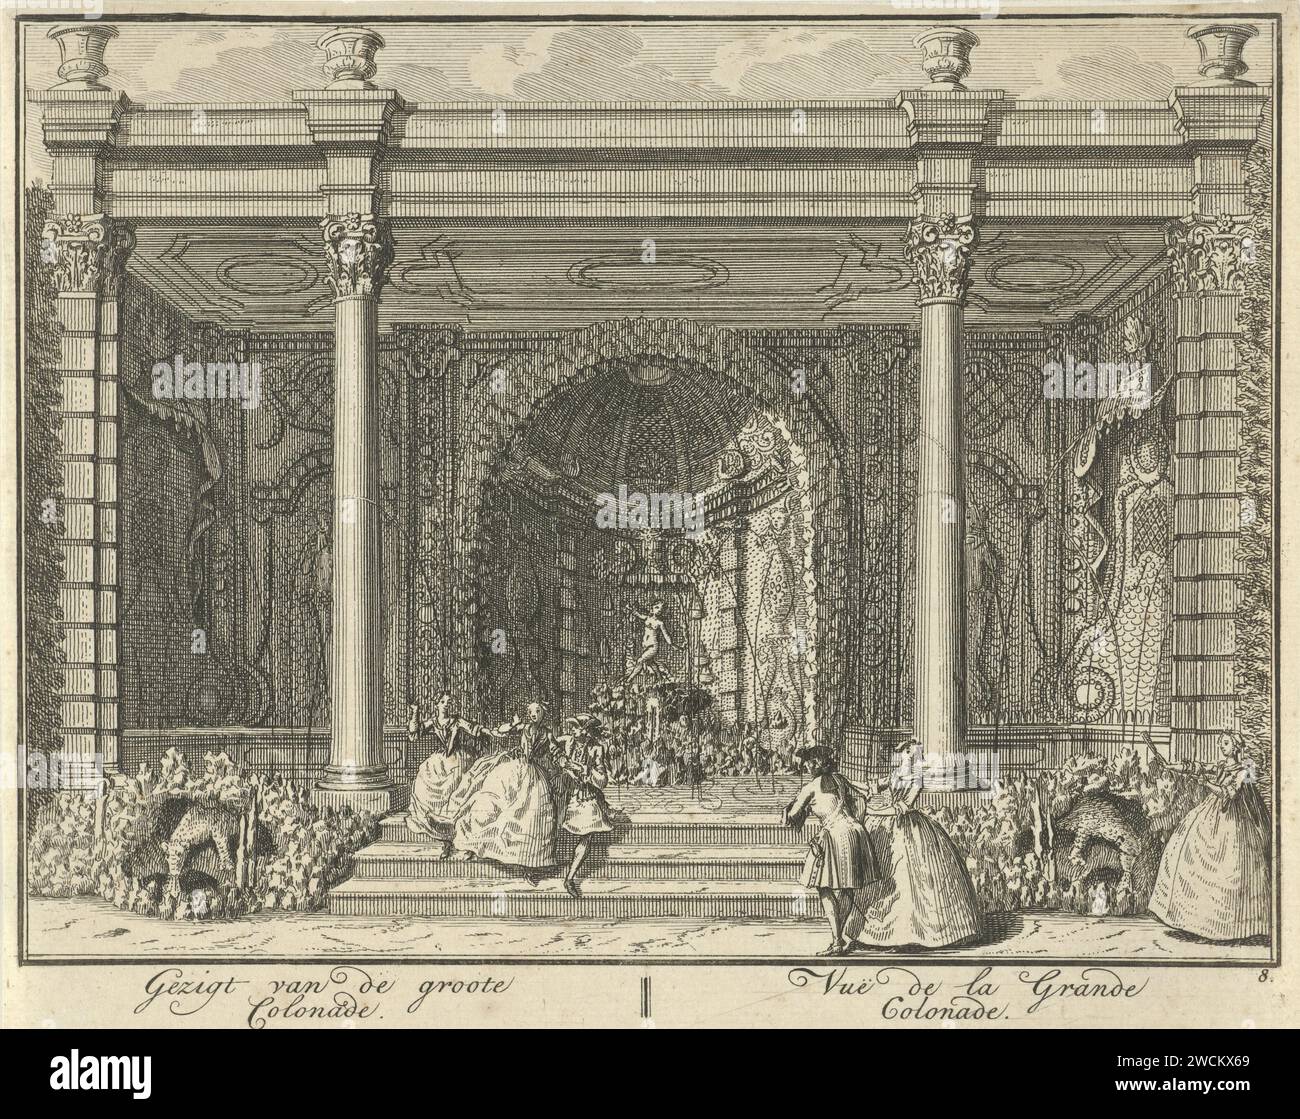 Colonnade in the garden of Huis ter Meer in Maarssen, Hendrik de Leth, c. 1740 print View of the richly decorated colonnade in the French garden of Huis ter Meer in Maarssen, with a few figures in the foreground. The print is part of a series with 26 faces at Huis ter Meer and the accompanying estate in Maarssen.  paper etching country-house. French or architectonic garden; formal garden House Ter Meer Stock Photo